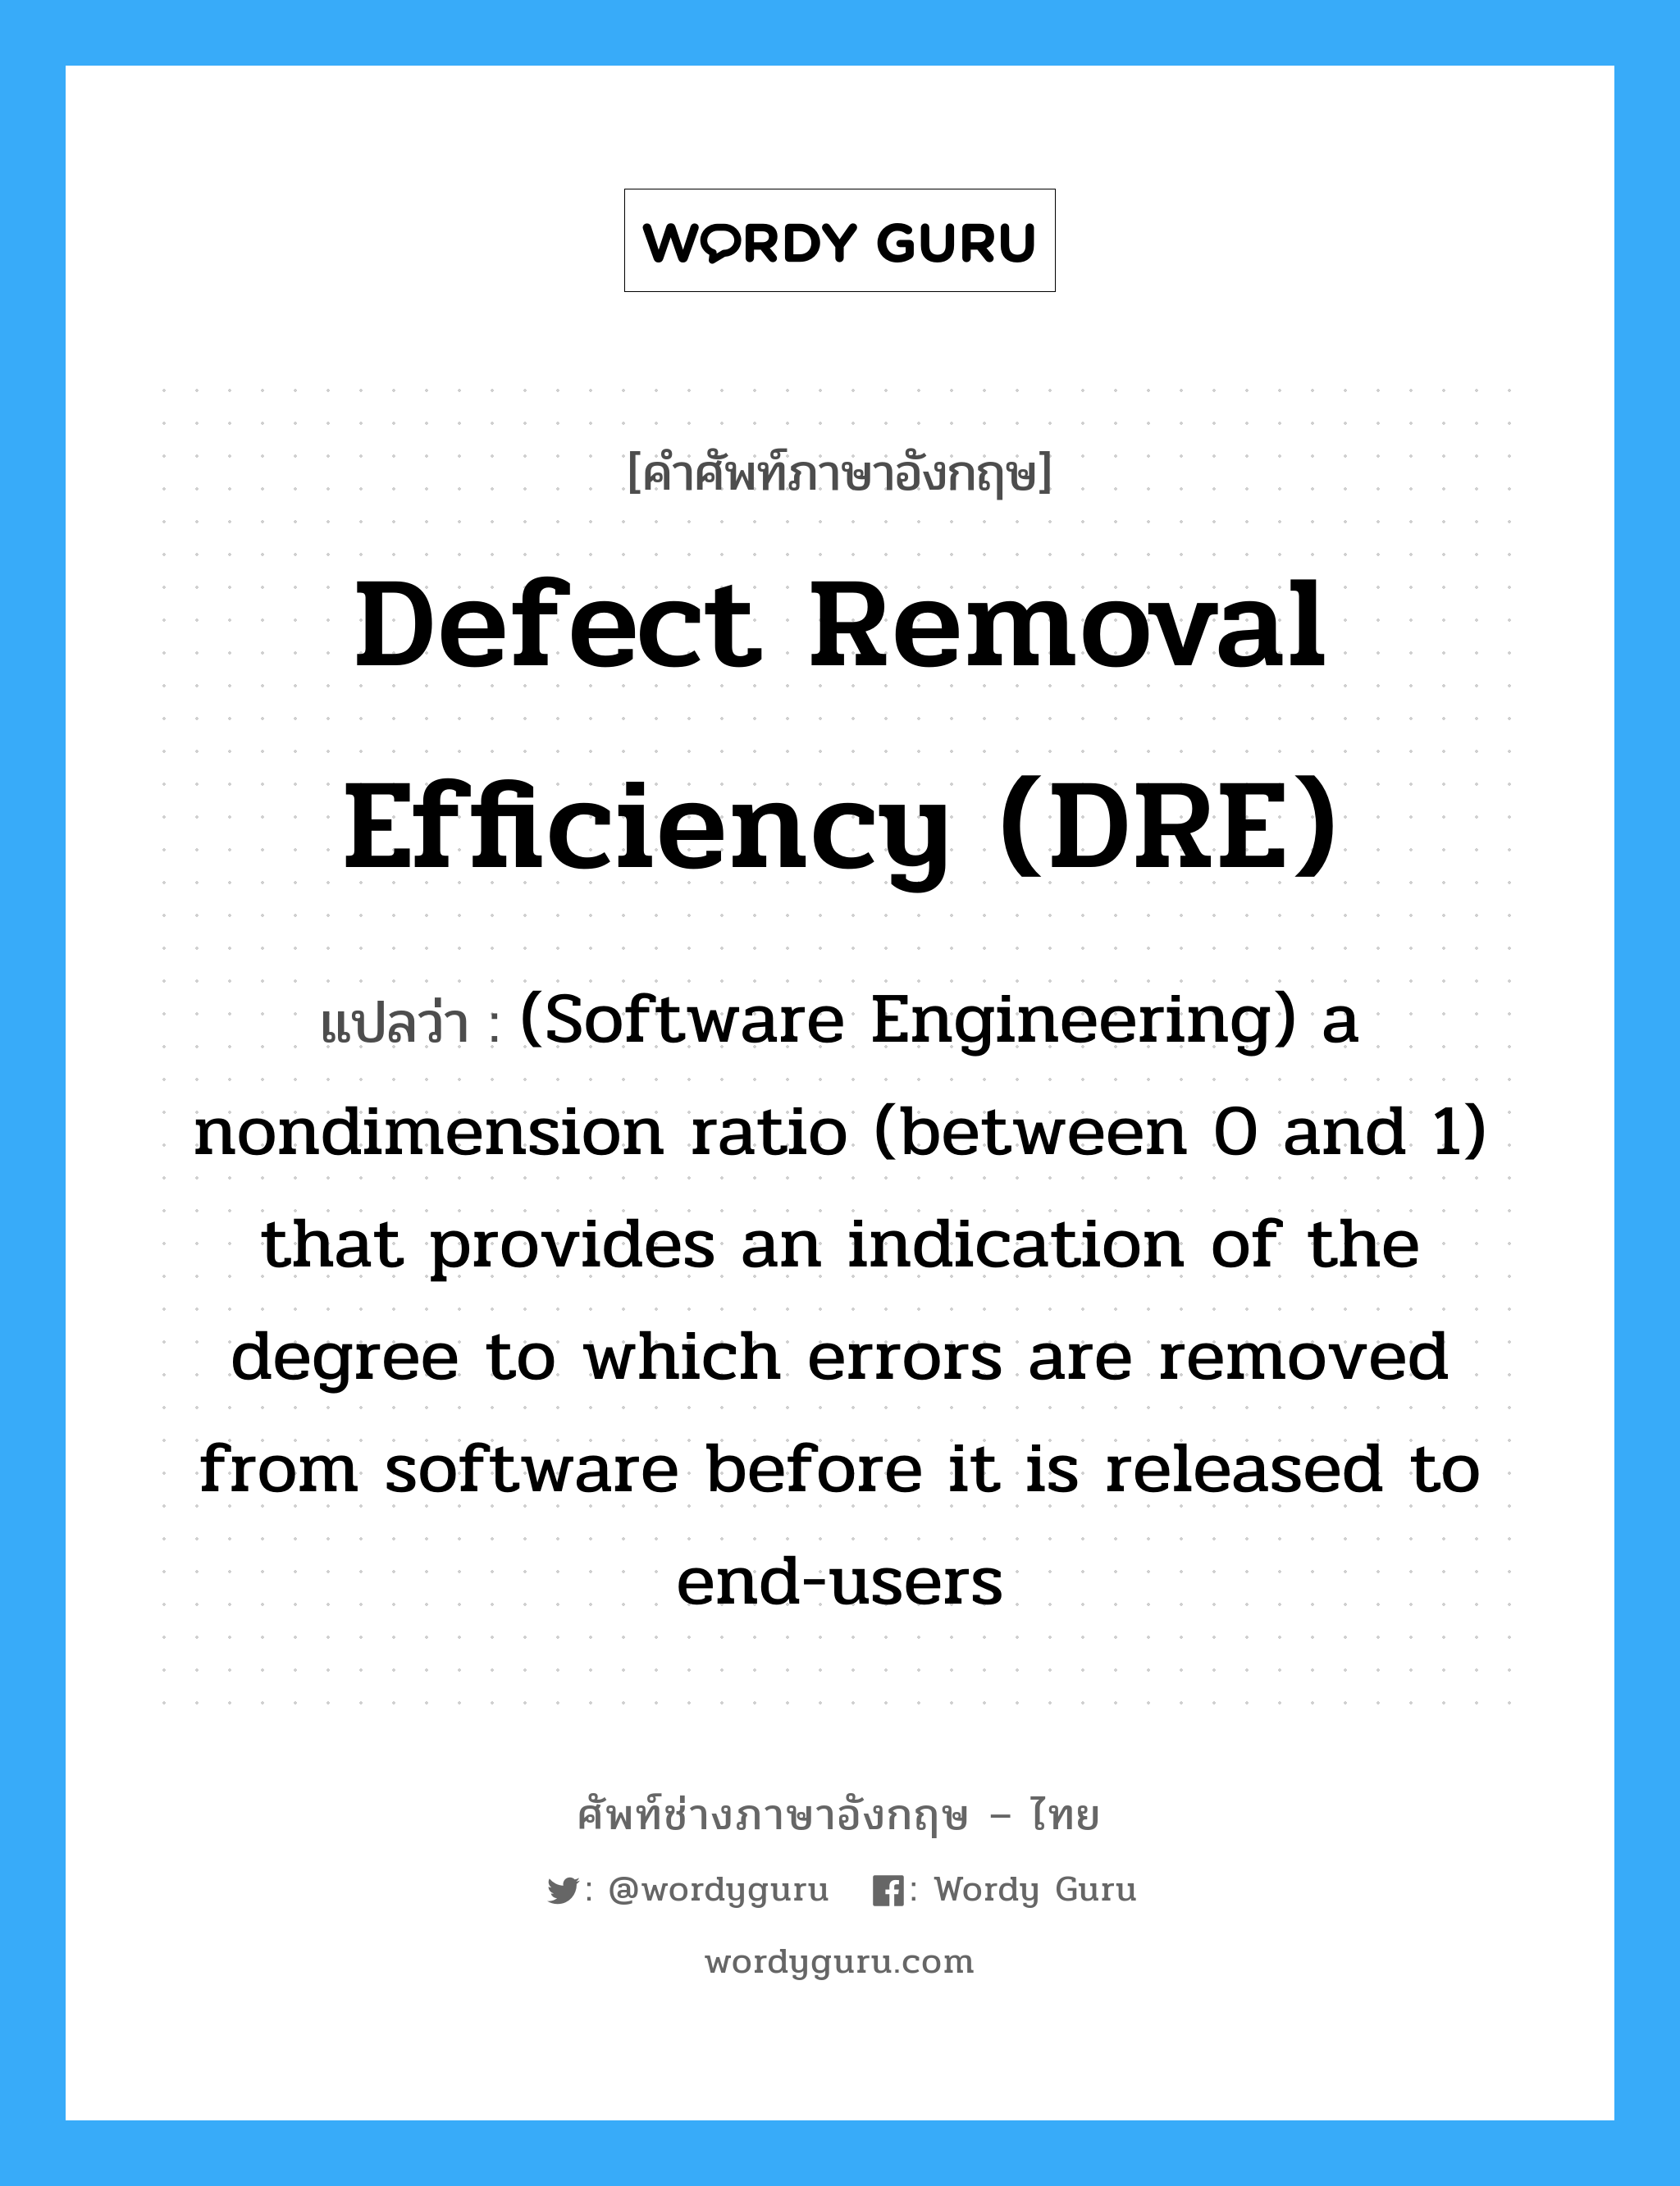 Defect removal efficiency (DRE) แปลว่า?, คำศัพท์ช่างภาษาอังกฤษ - ไทย Defect removal efficiency (DRE) คำศัพท์ภาษาอังกฤษ Defect removal efficiency (DRE) แปลว่า (Software Engineering) a nondimension ratio (between 0 and 1) that provides an indication of the degree to which errors are removed from software before it is released to end-users